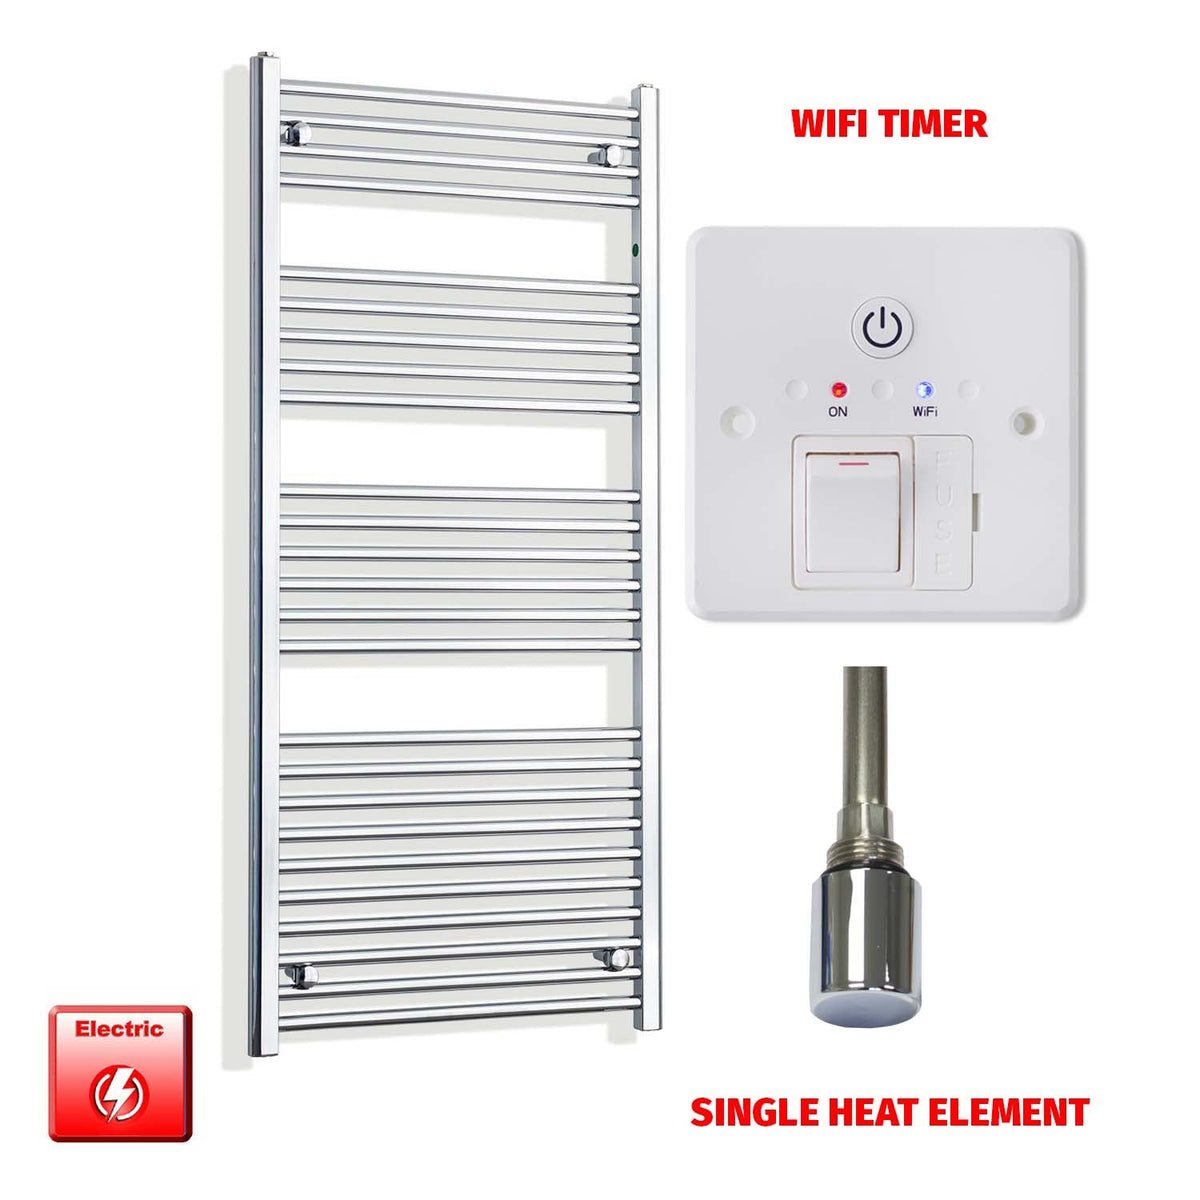 1400mm High 550mm Wide Pre-Filled Electric Heated Towel Radiator Straight Chrome Single heat element Wifi timer